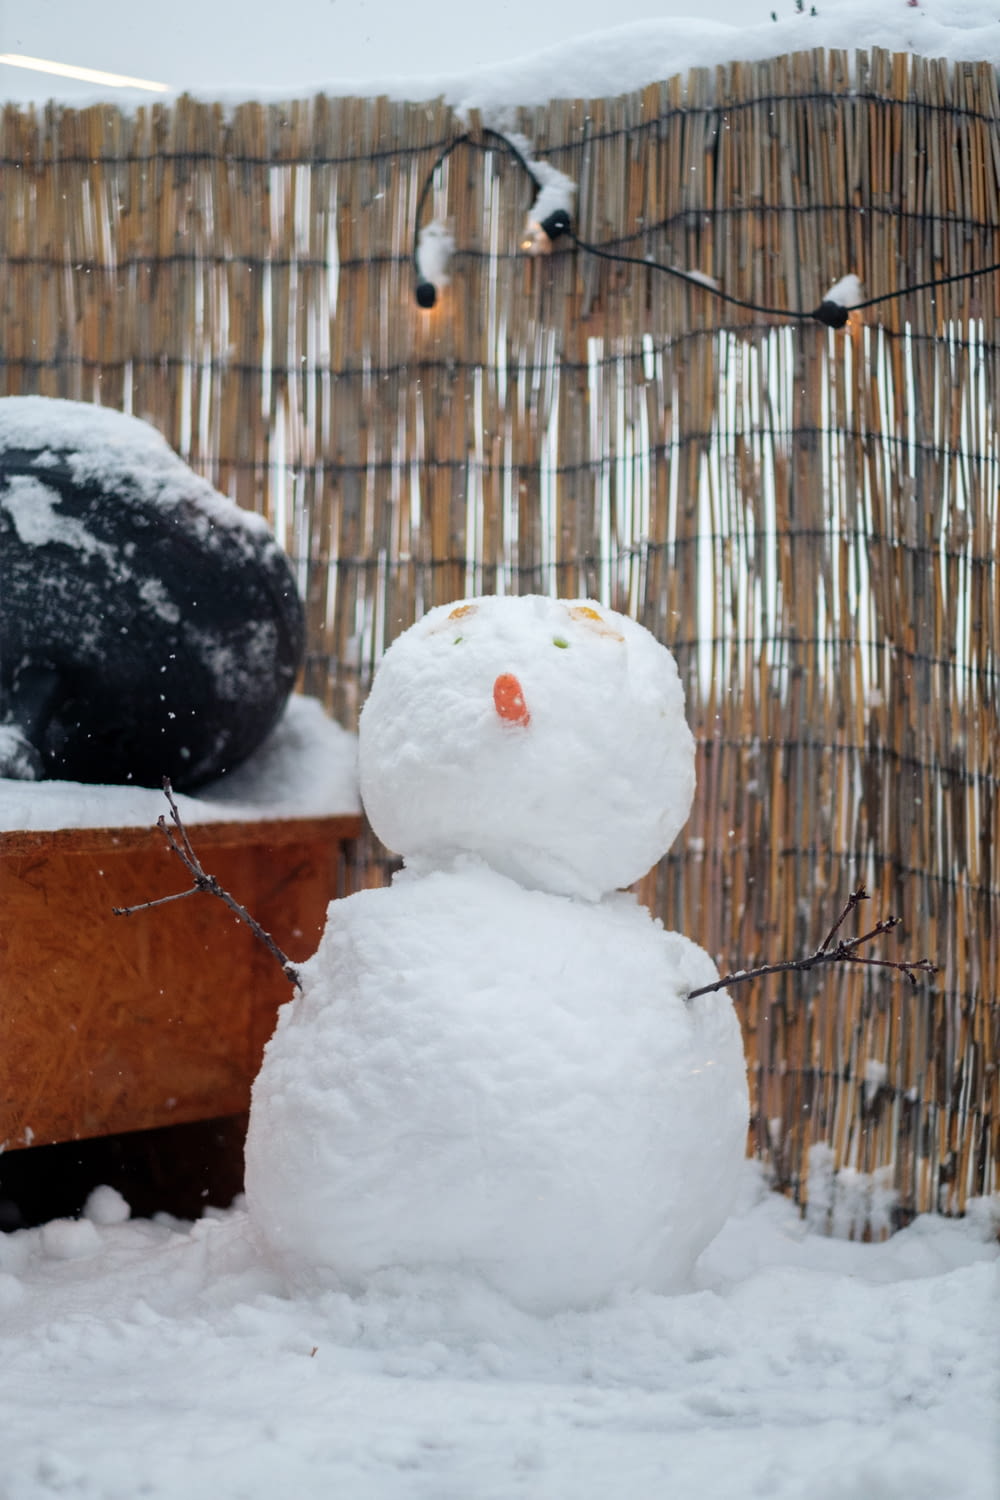 a snowman in front of a bamboo fence